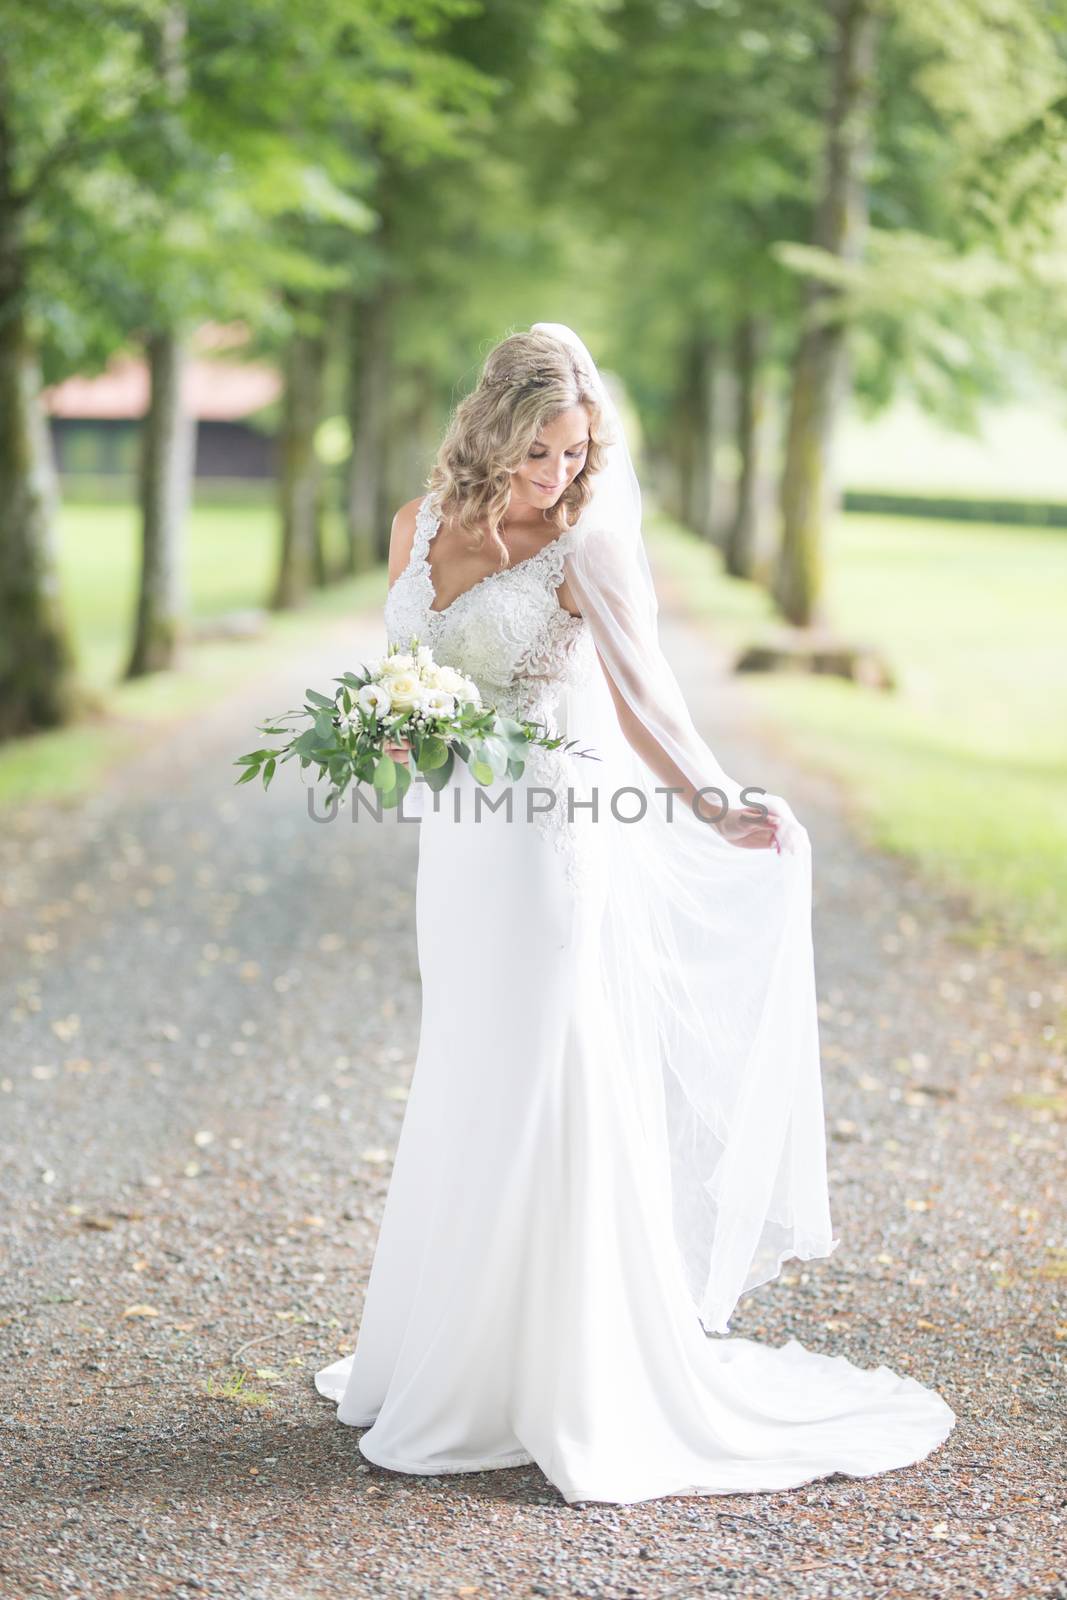 Full length portrait of beautiful sensual young blond bride in long white wedding dress and veil, holding bouquet outdoors in natural background.